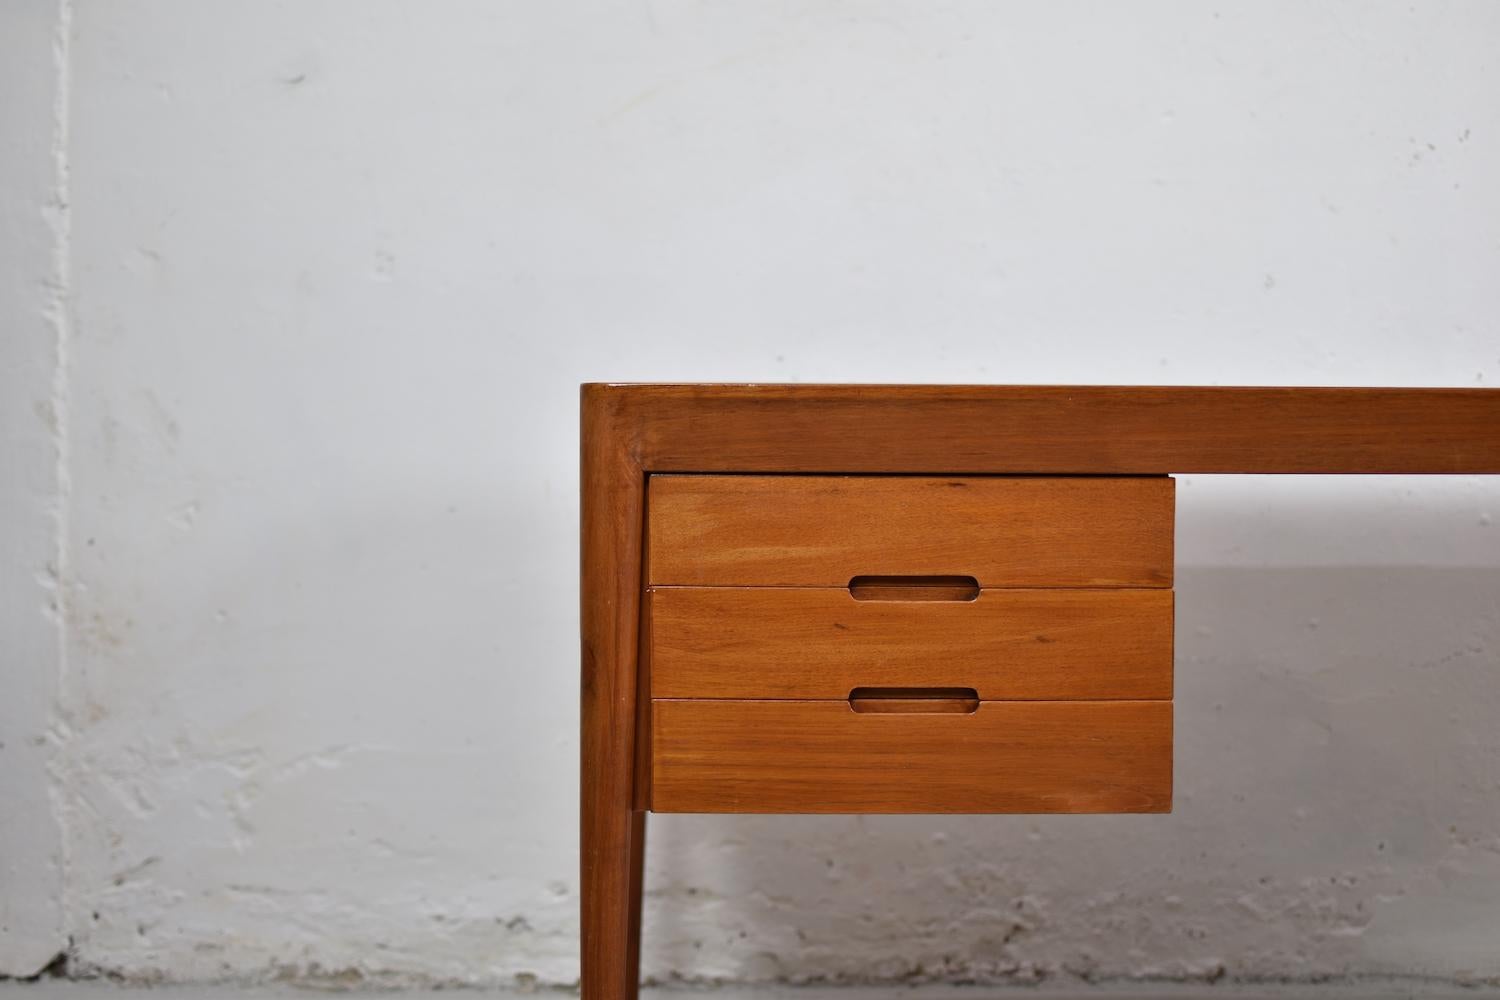 Suberb high quality free standing desk by Erik Riisager for Haslev Møbelfabrik, Denmark, 1960s. This elegant desk is made out of teak and features three drawers on the left, the top drawer has teak tray inside which can be pulled over the drawer and